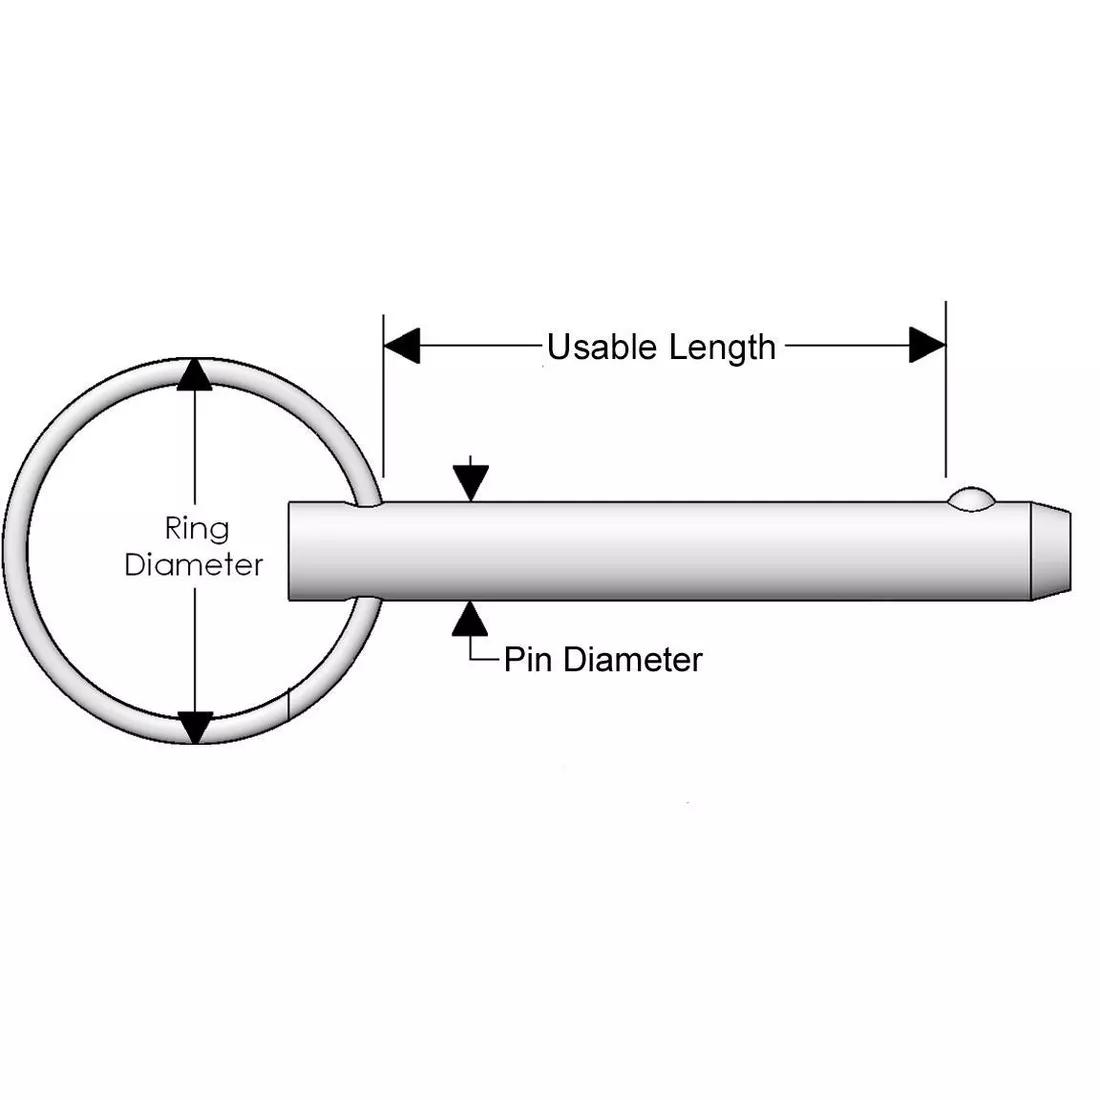 Ring Detent Pin - Line Drawing